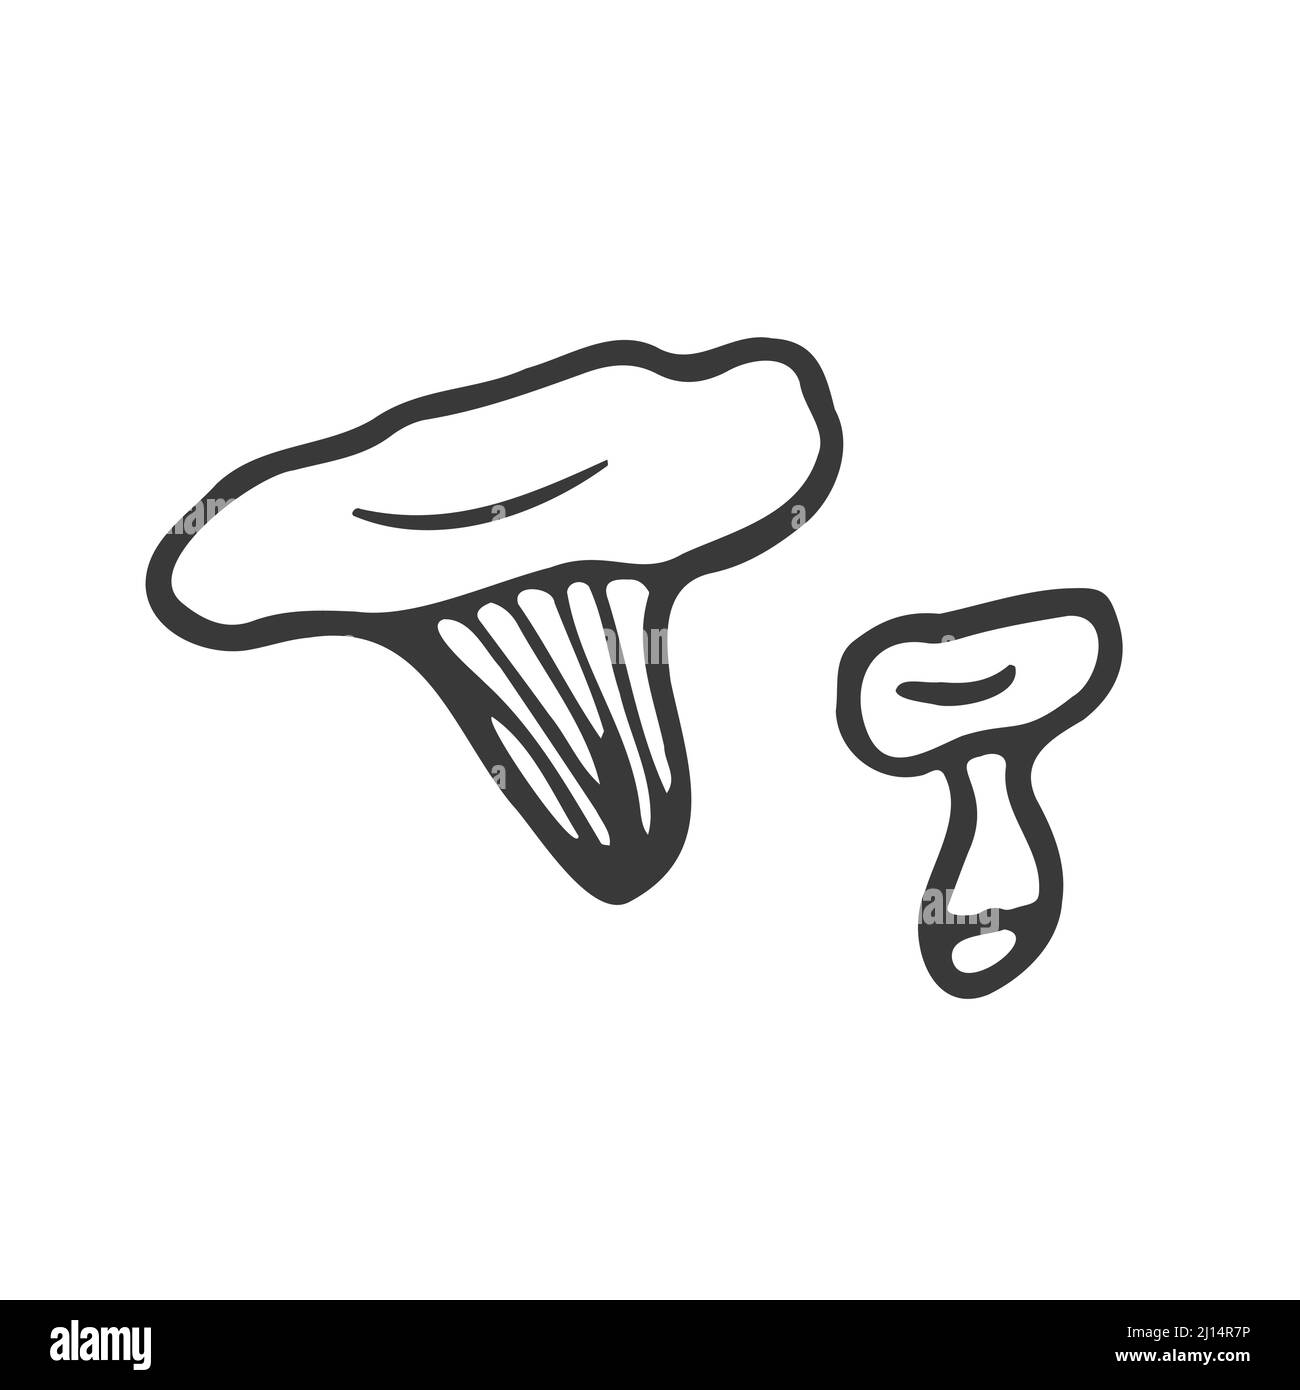 Doodle forest mushroom. Hand drawn sketch line art, vector illustration isolated on white background, gray line art Stock Vector